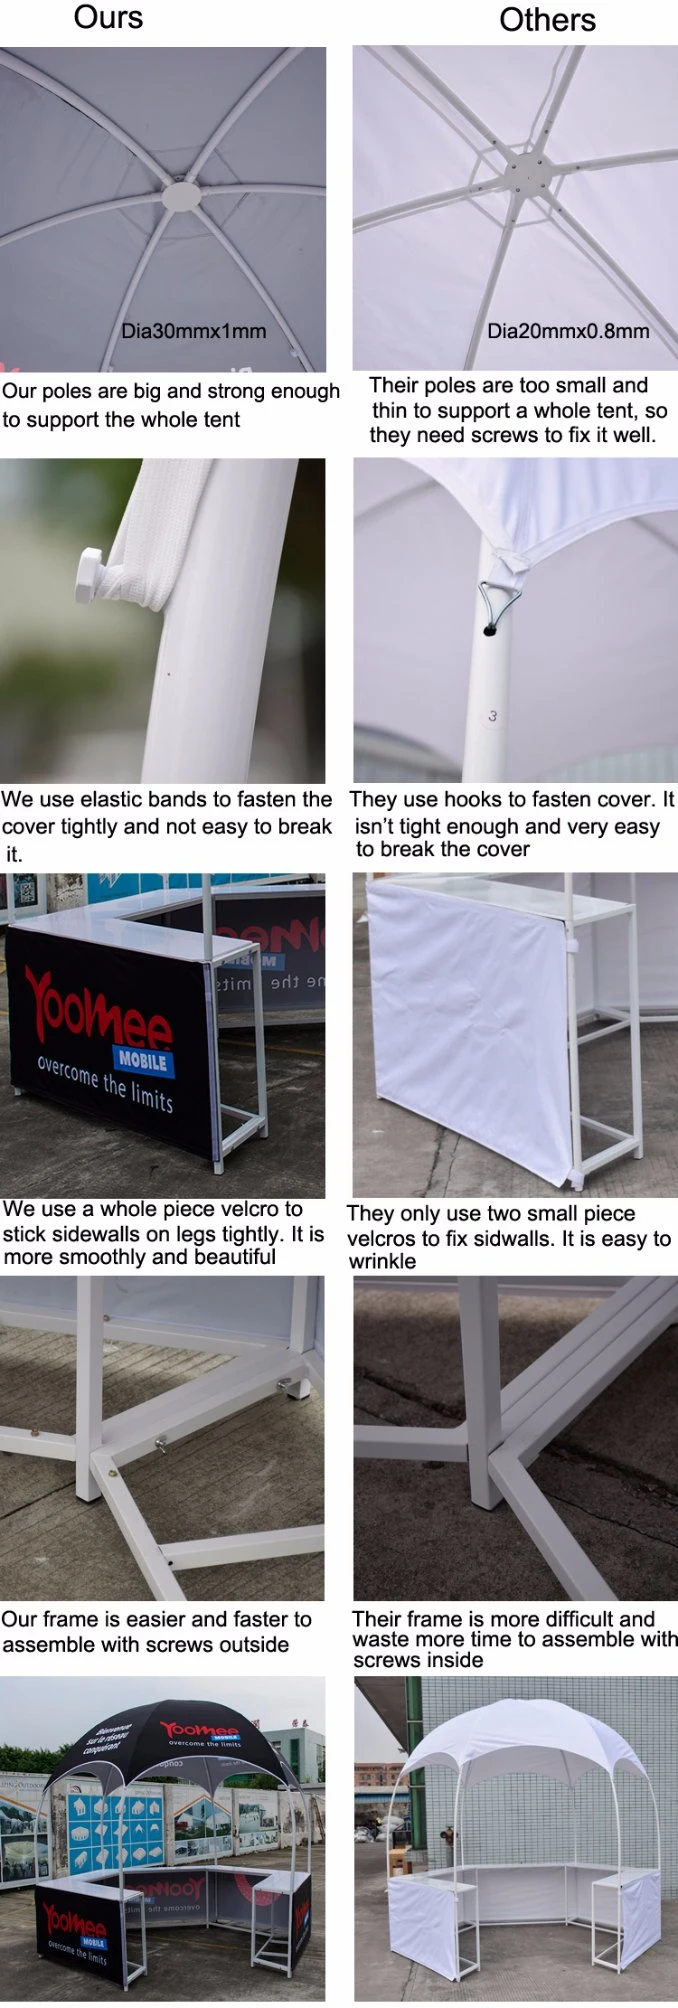 Display Round 3m Dome Tent Kiosk Booth with Tables for Outdoors Advertising Events